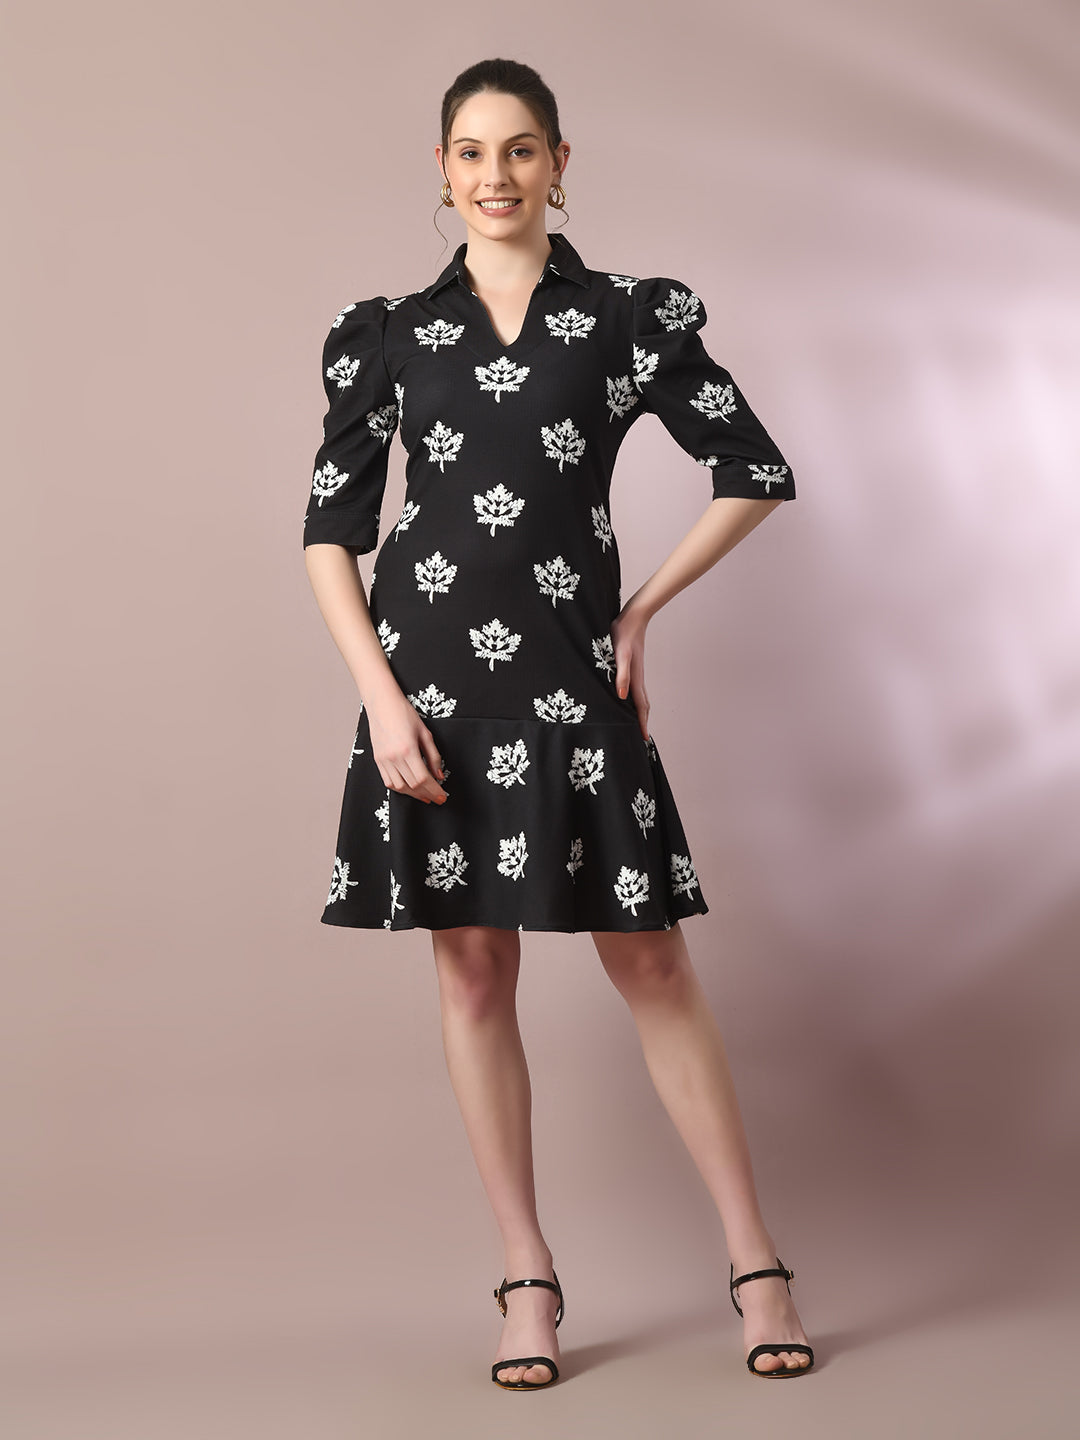 Women's  Black Printed Shirt Collar Fit And Flare Party Dress  - Myshka